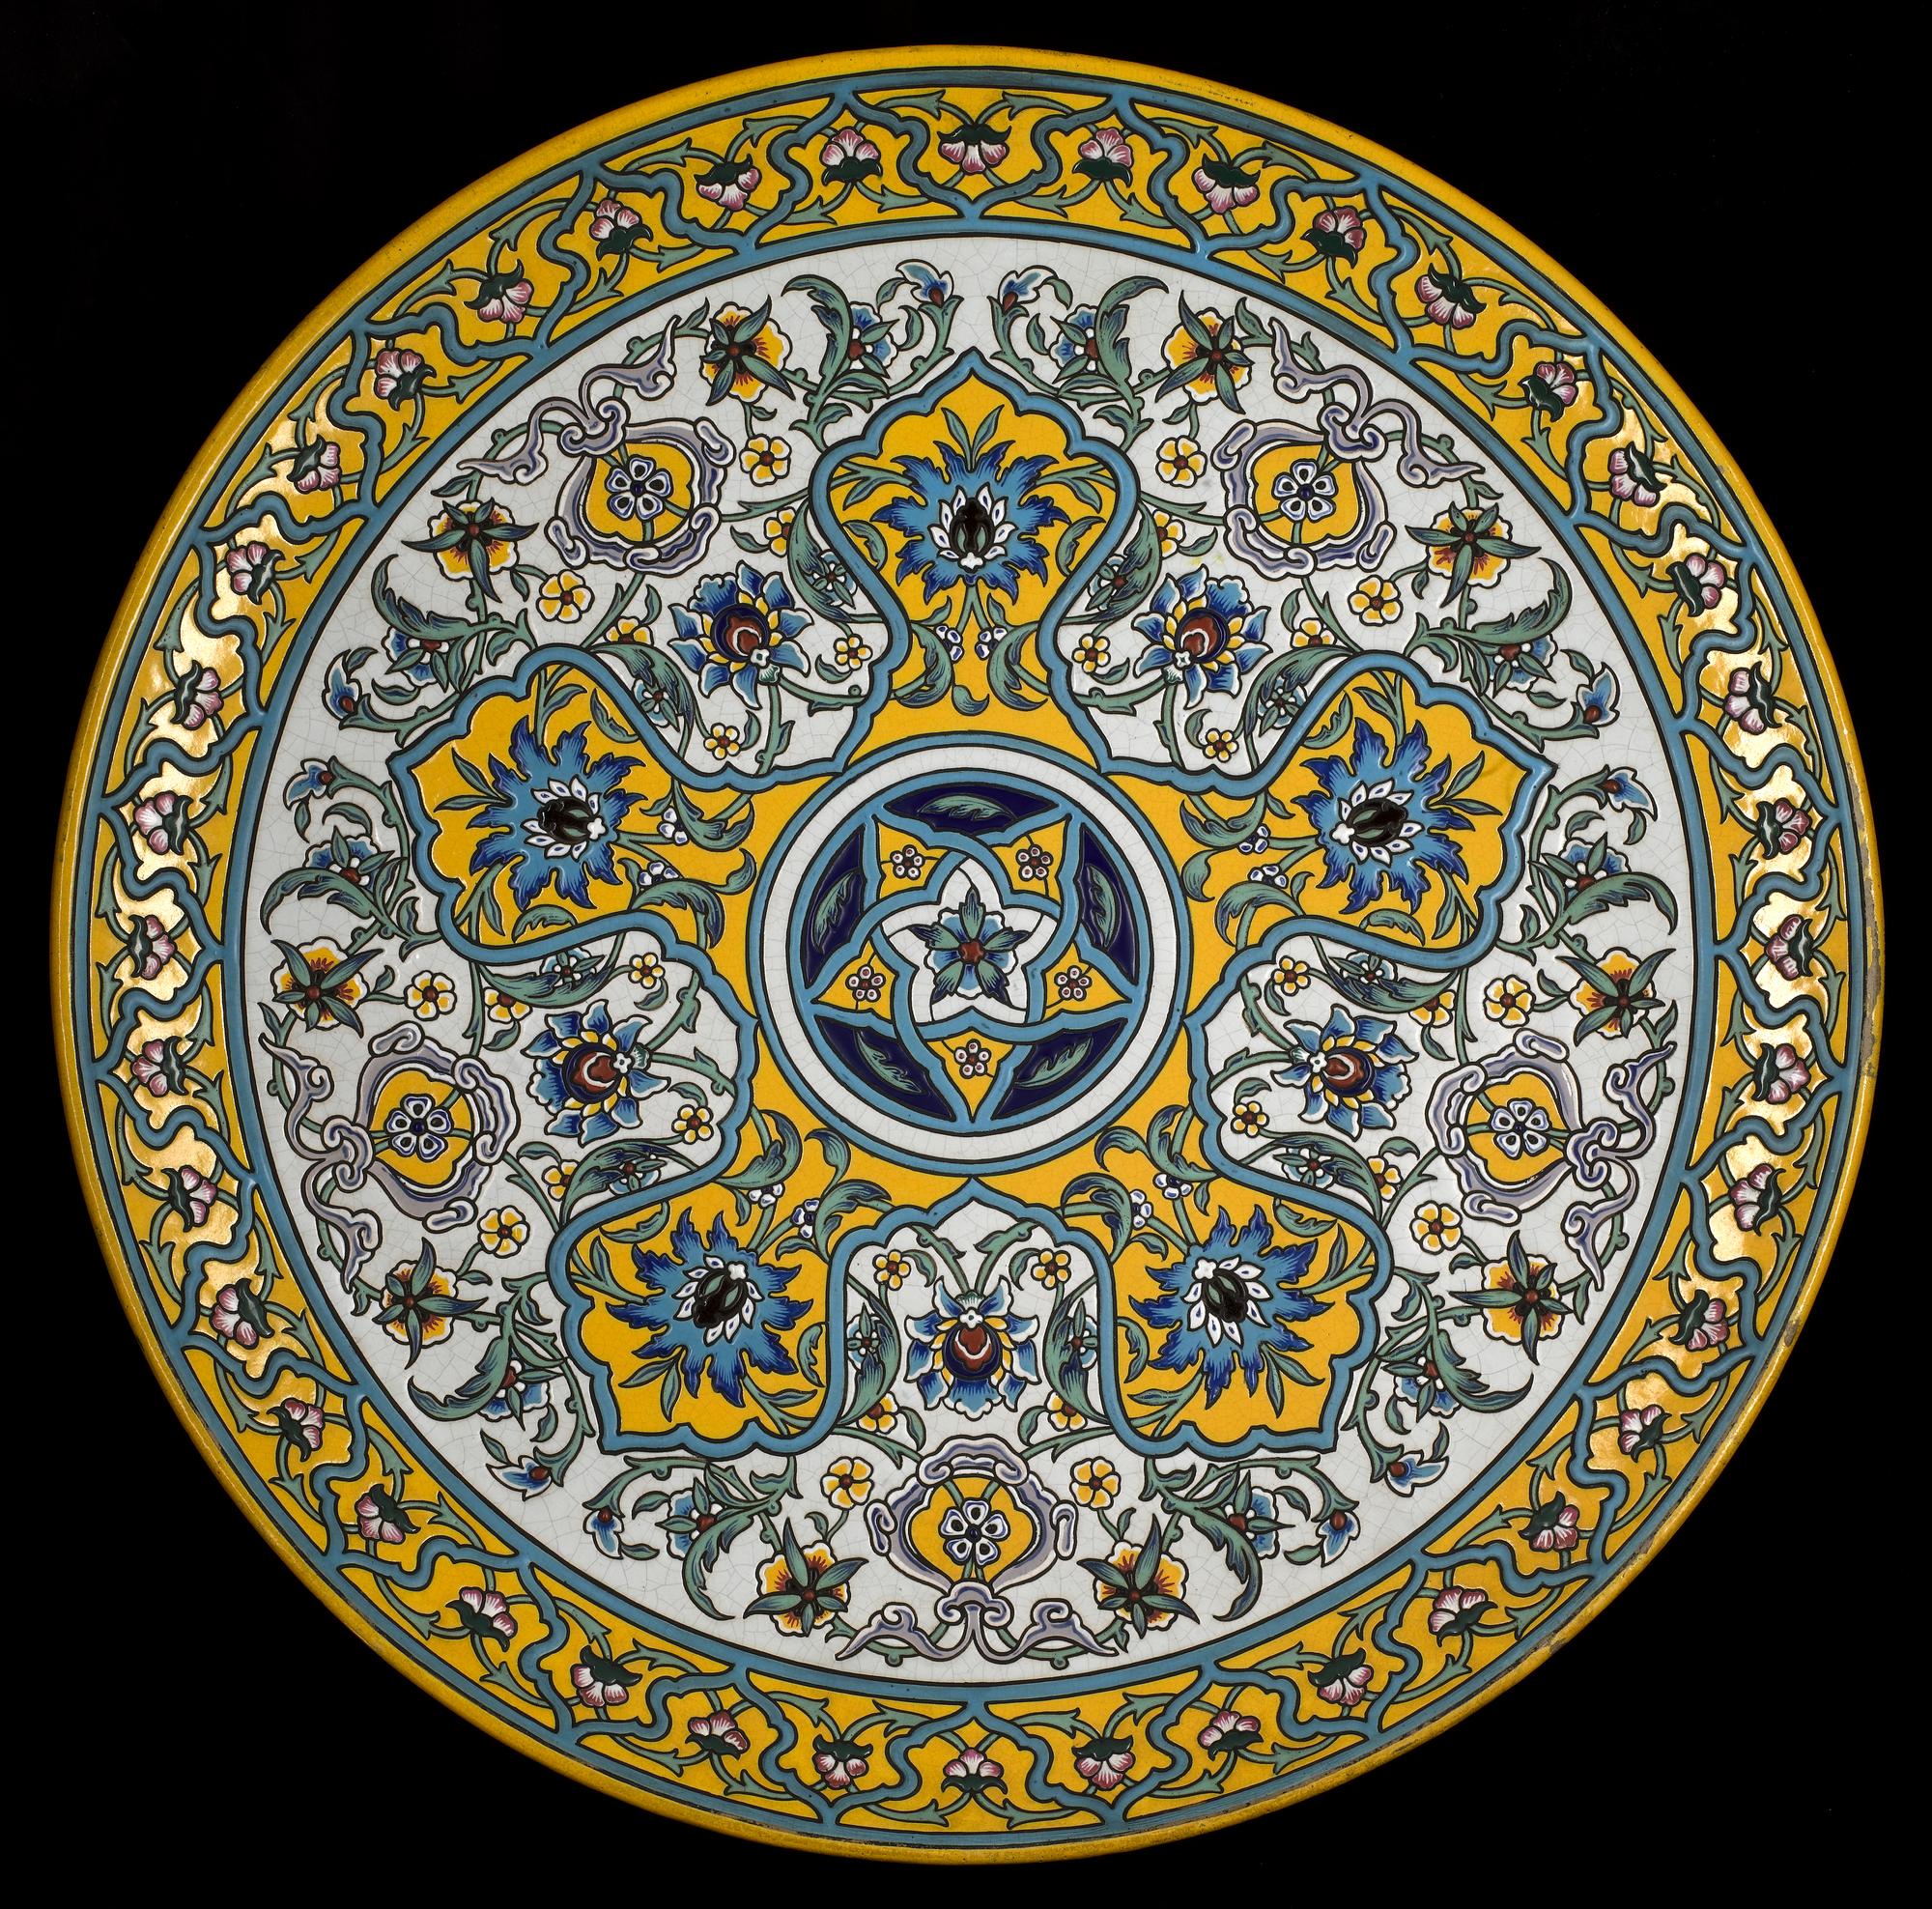 Painted and glazed earthenware dish by Leon Parville, Paris, France, c1873